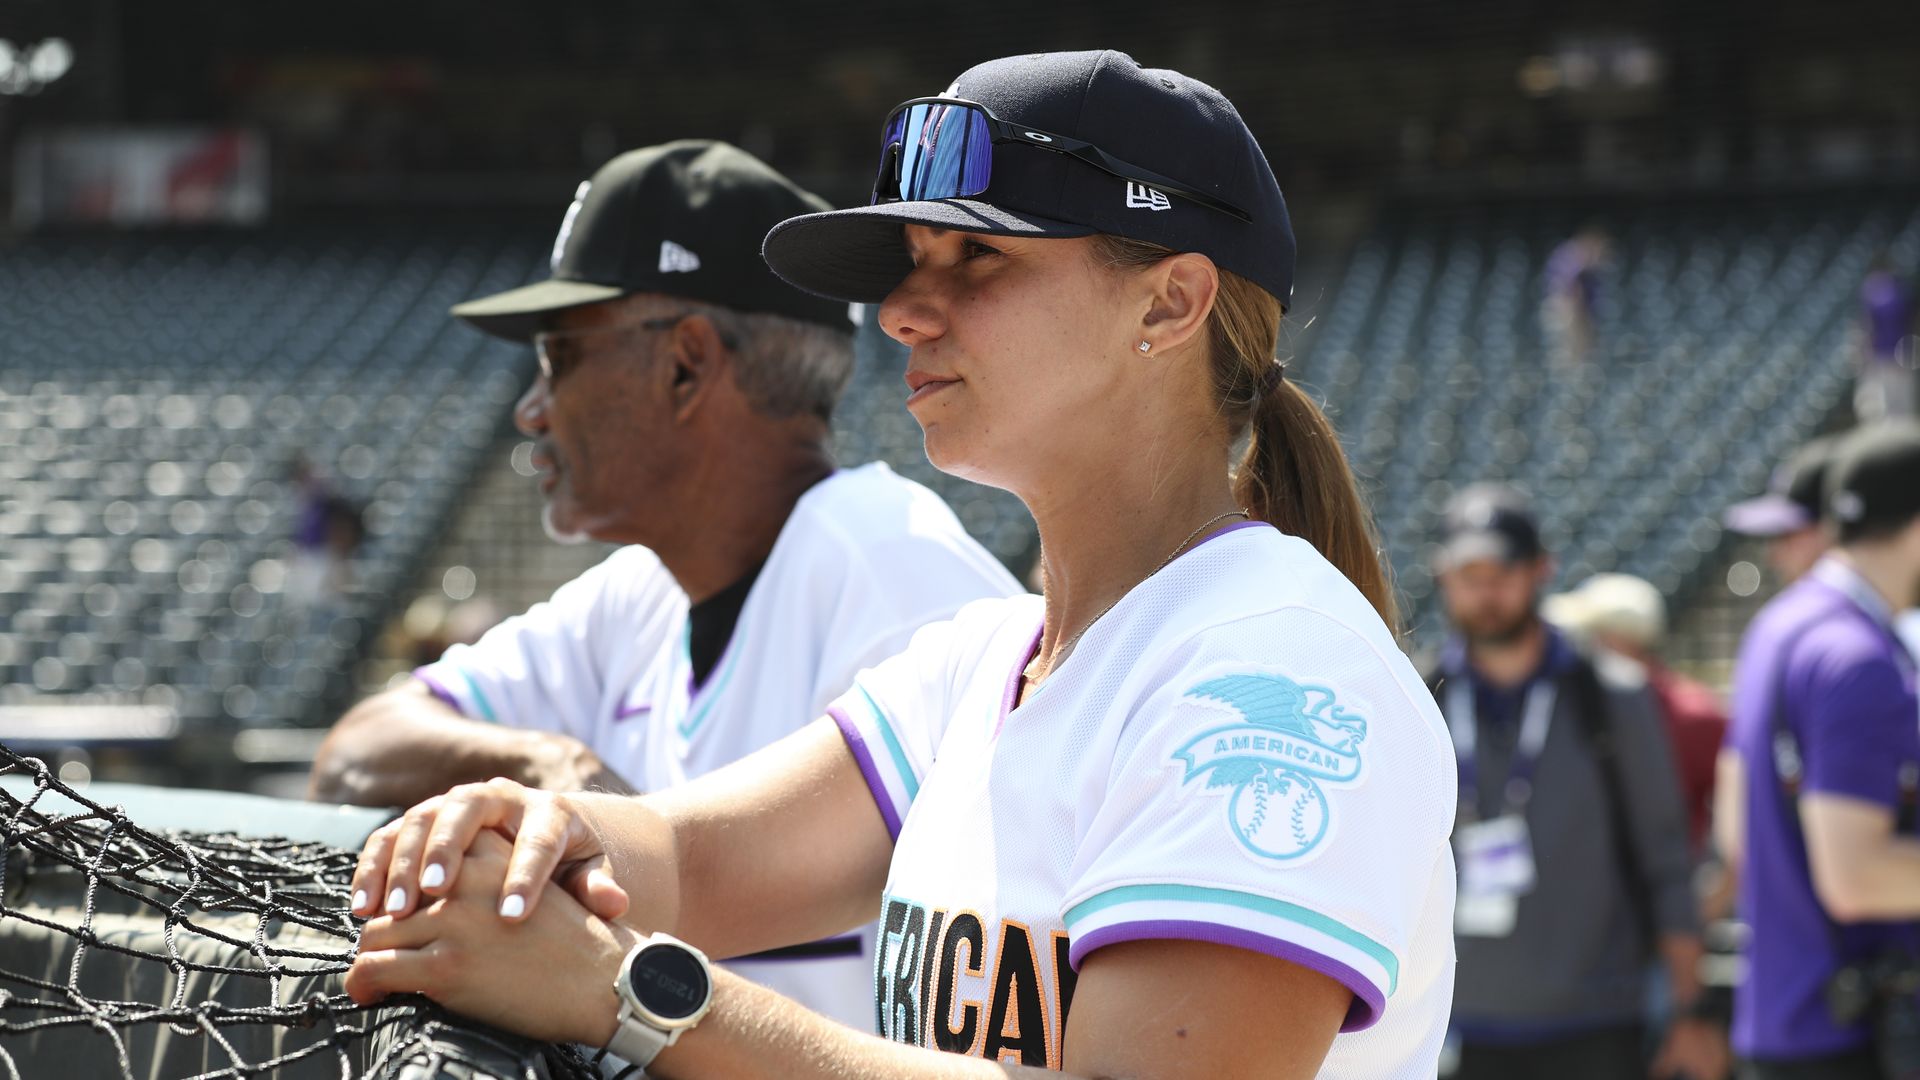 Rachel Balkovec wins debut as manager of Yankees affiliate